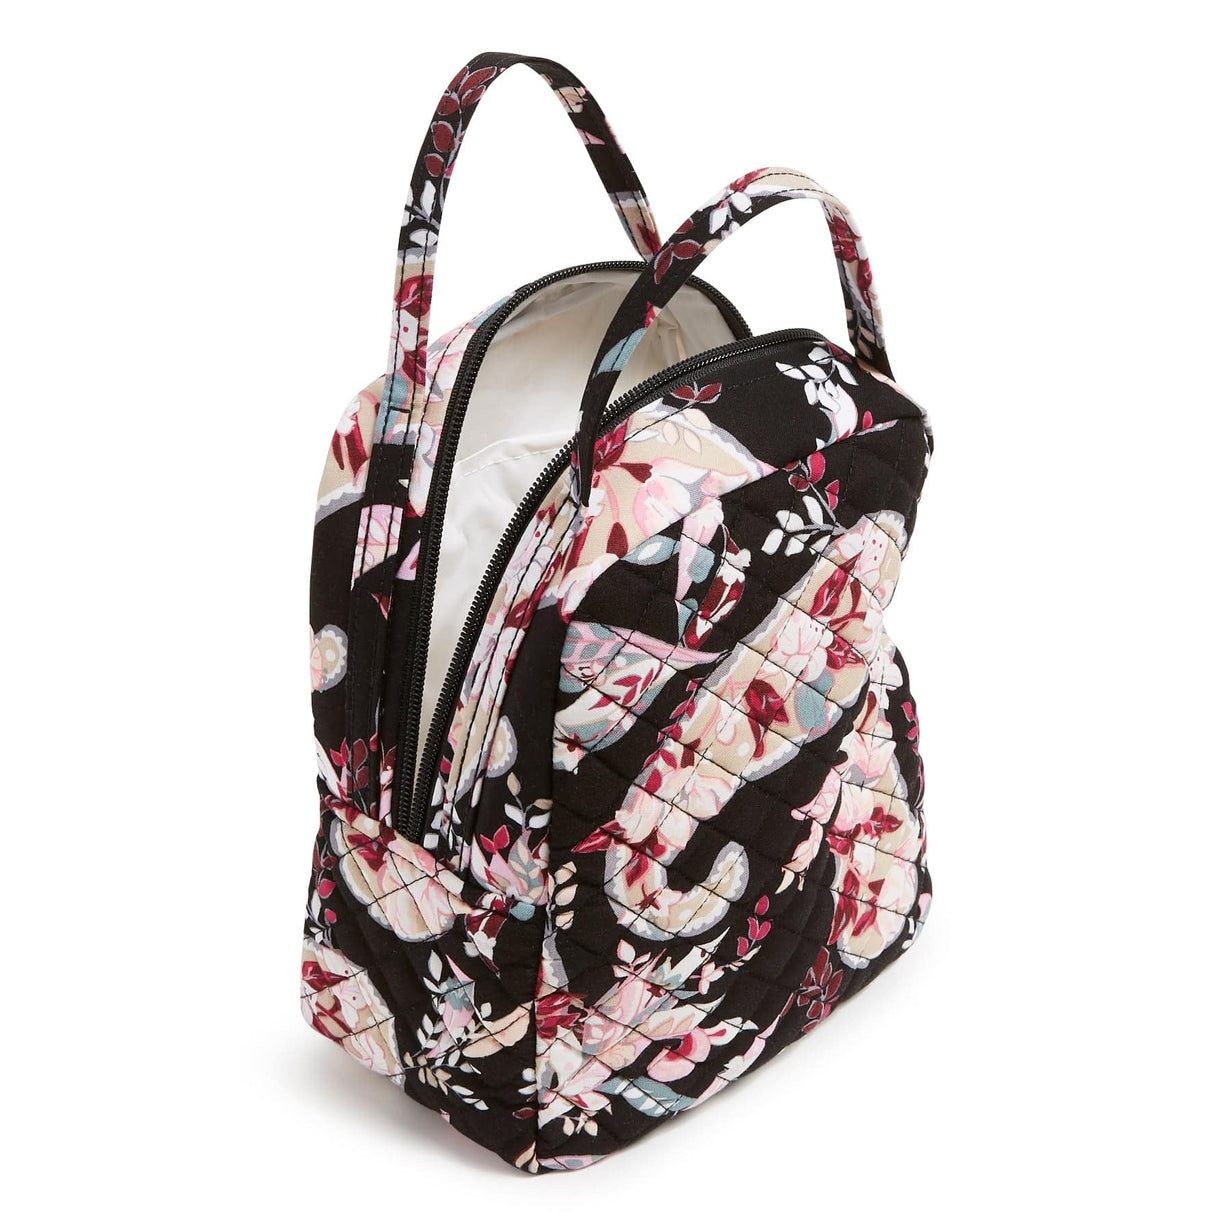 Vera Bradley And Tupperware Just Launched A To-Go Line